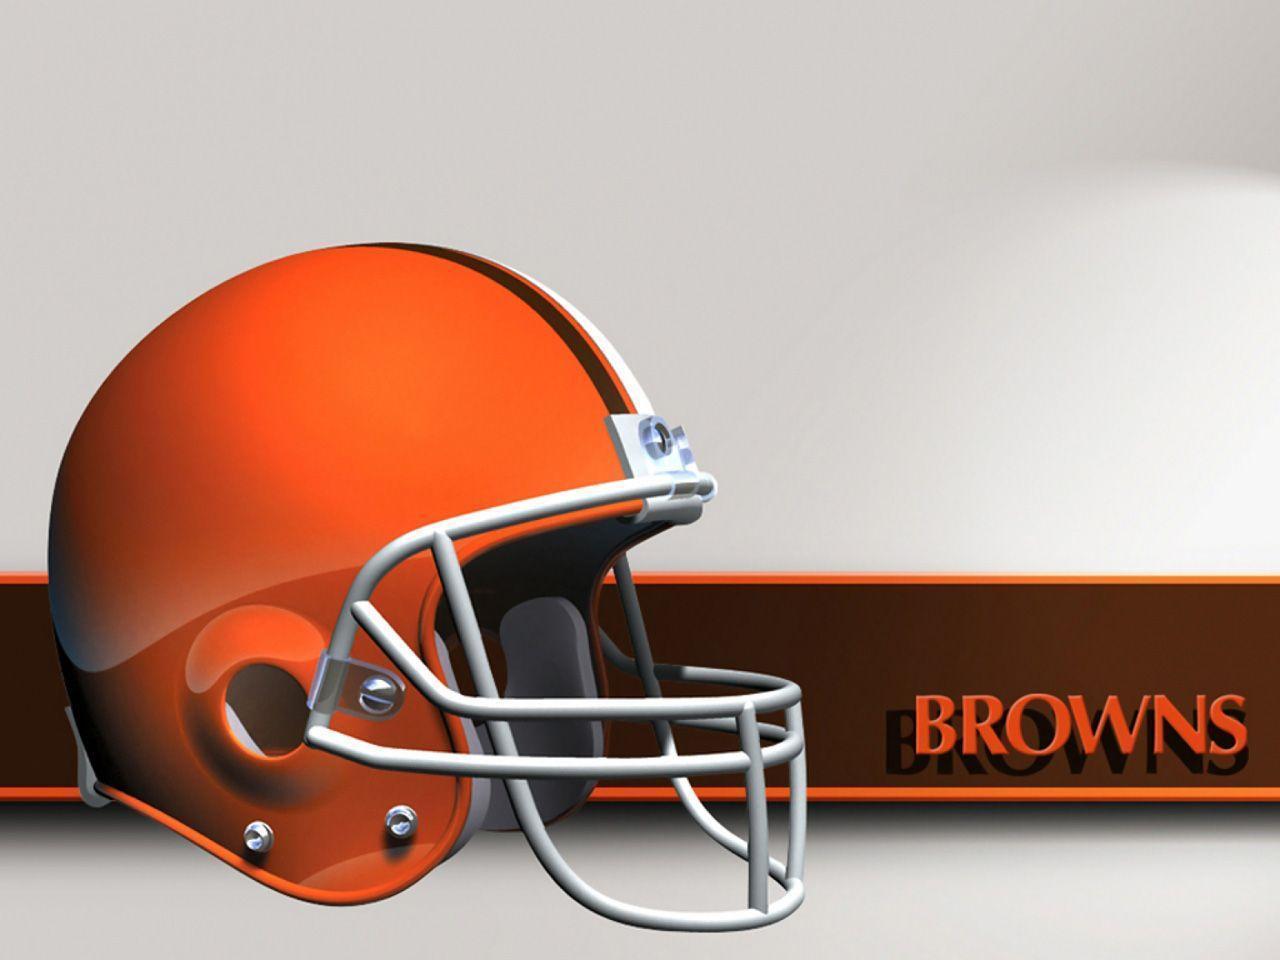 Cleveland Browns Wallpaper Picture 24437 Image. wallgraf